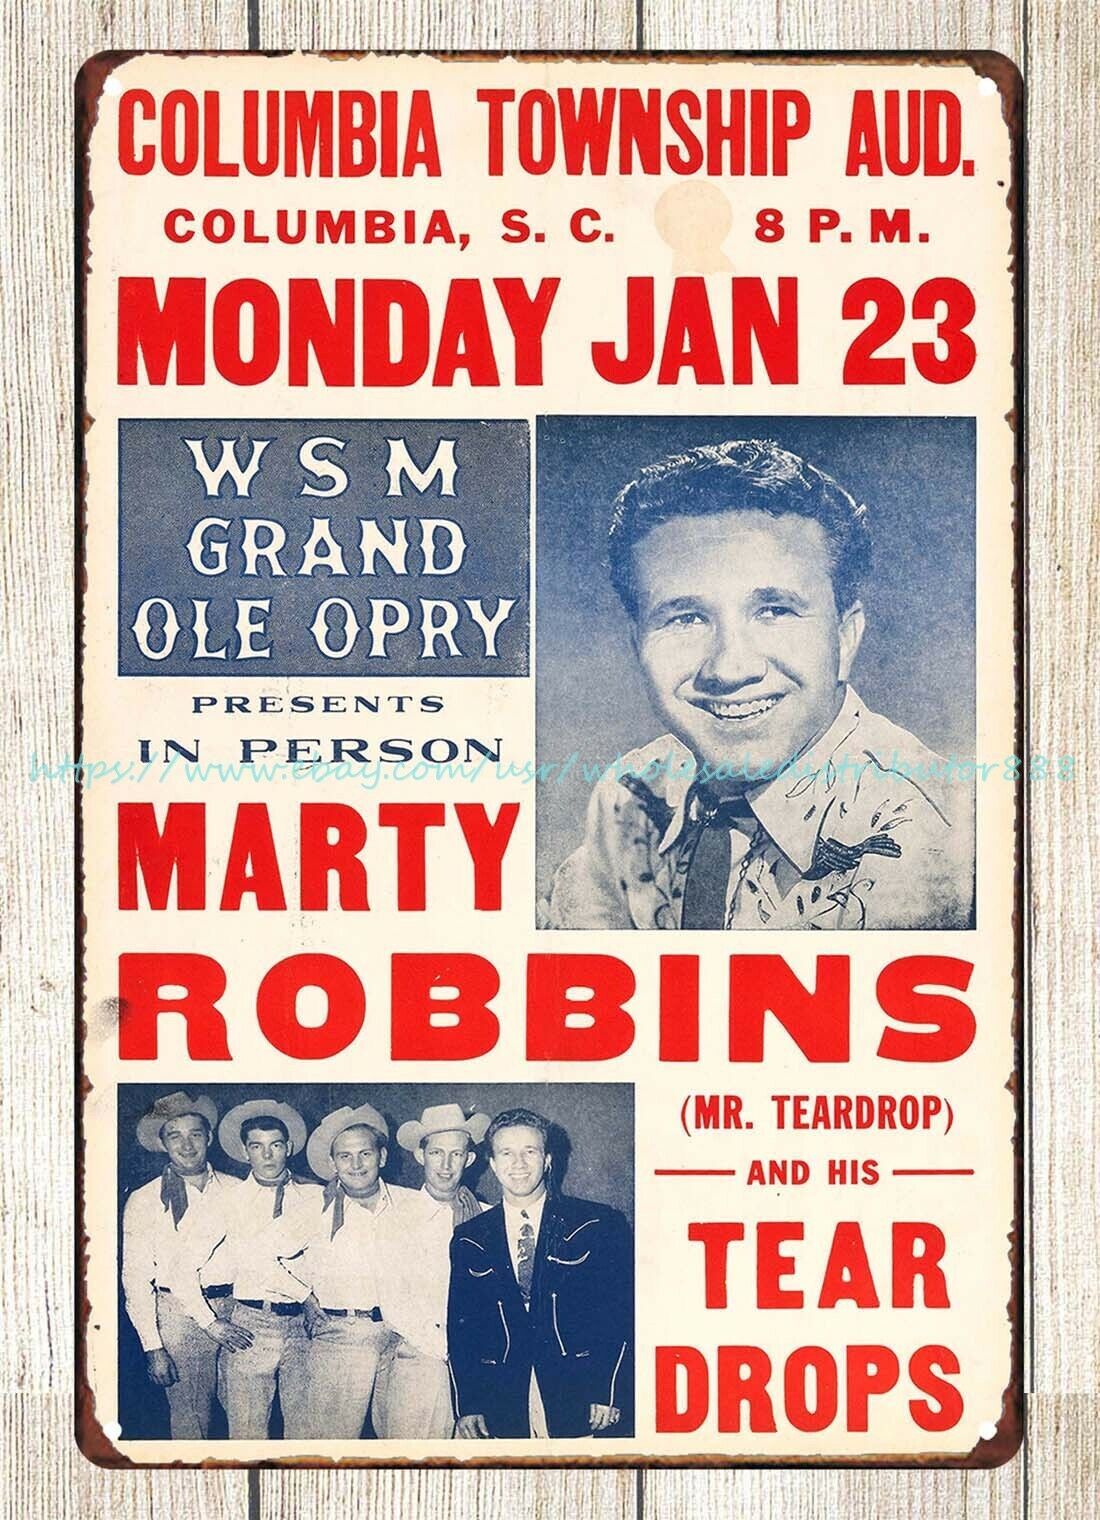 1956 Marty Robbins Grand Ole Opry Columbia Township Aud. Concert Poster metal